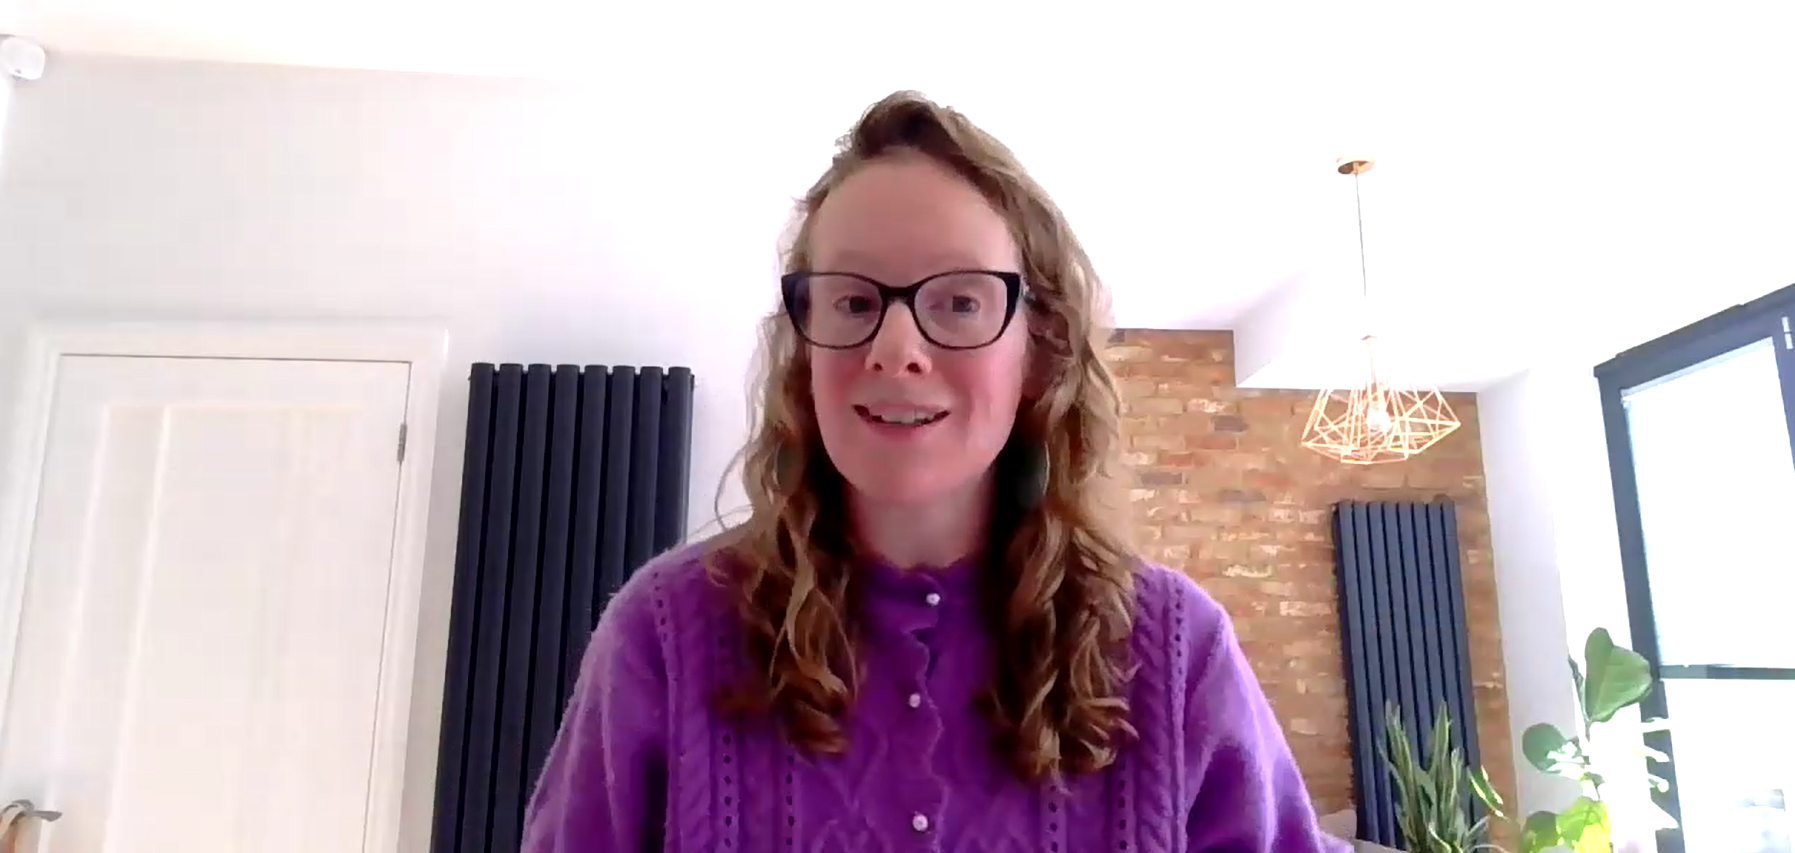 Screenshot of Jess Meredith speaking during the webinar. Jess has long red curly hair and is wearing a purple cardigan and glasses.